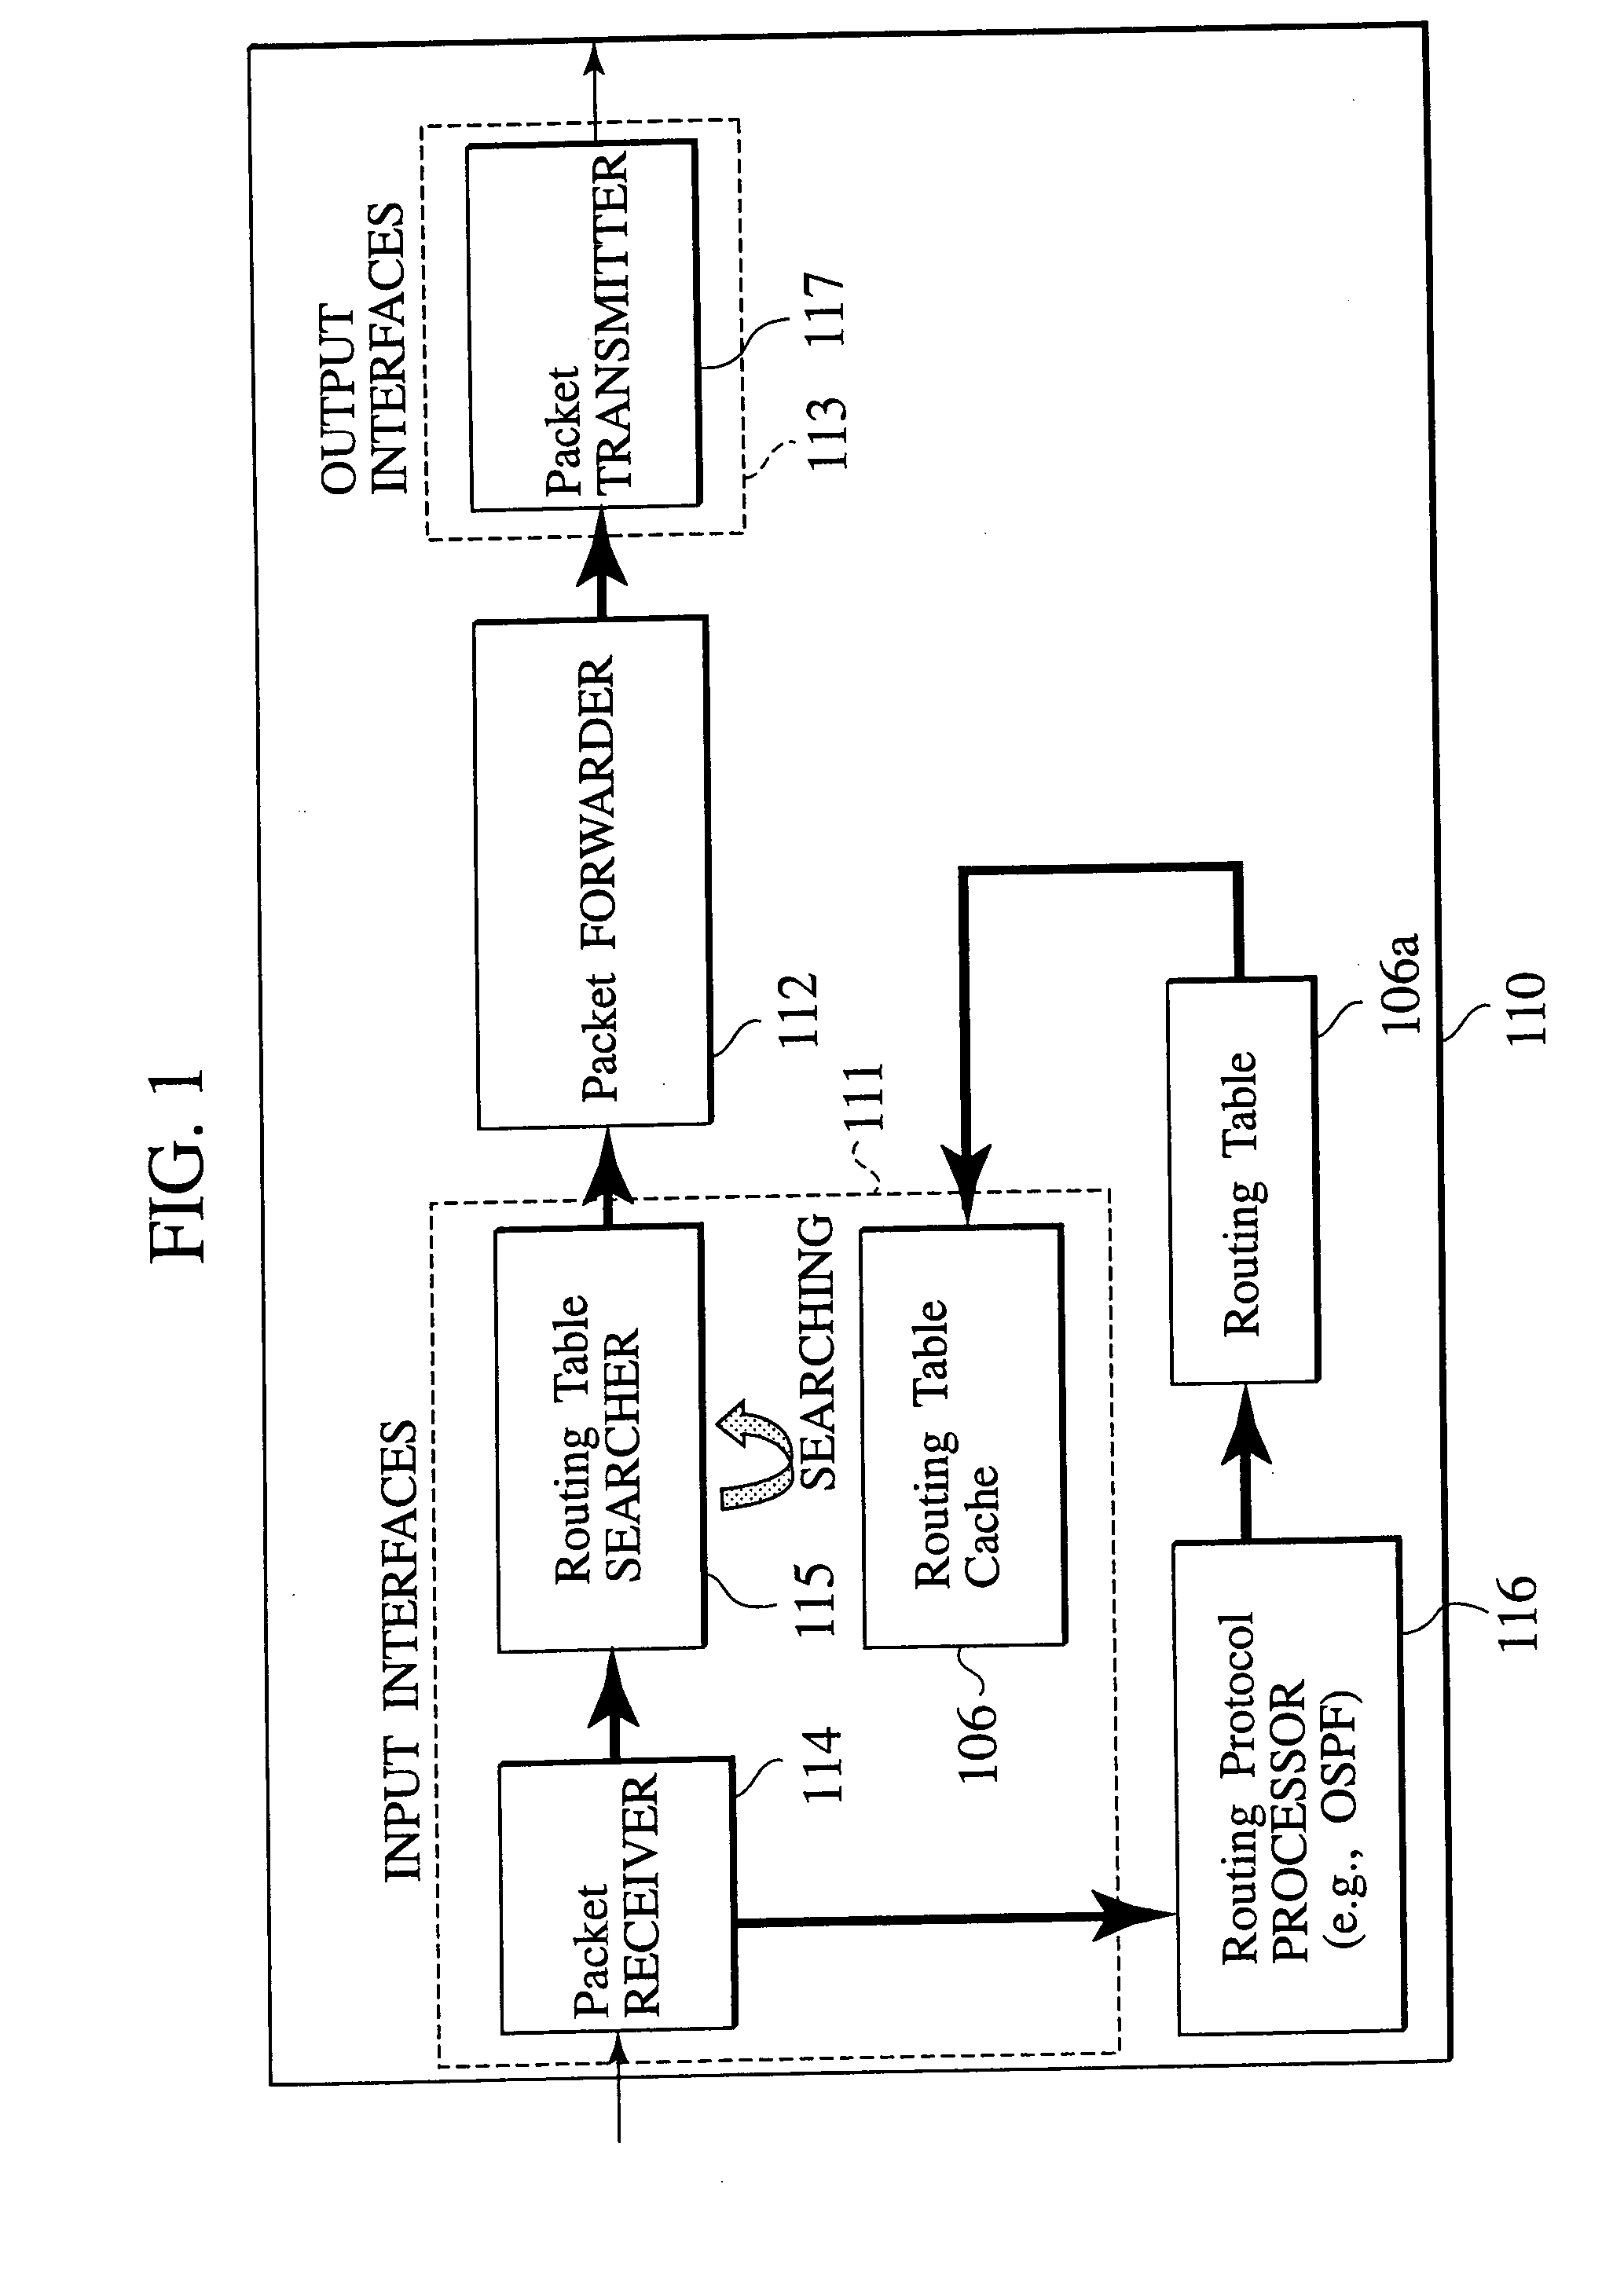 Packet switching system, packet switching method, routing apparatus, structure of packet, and packet generating method